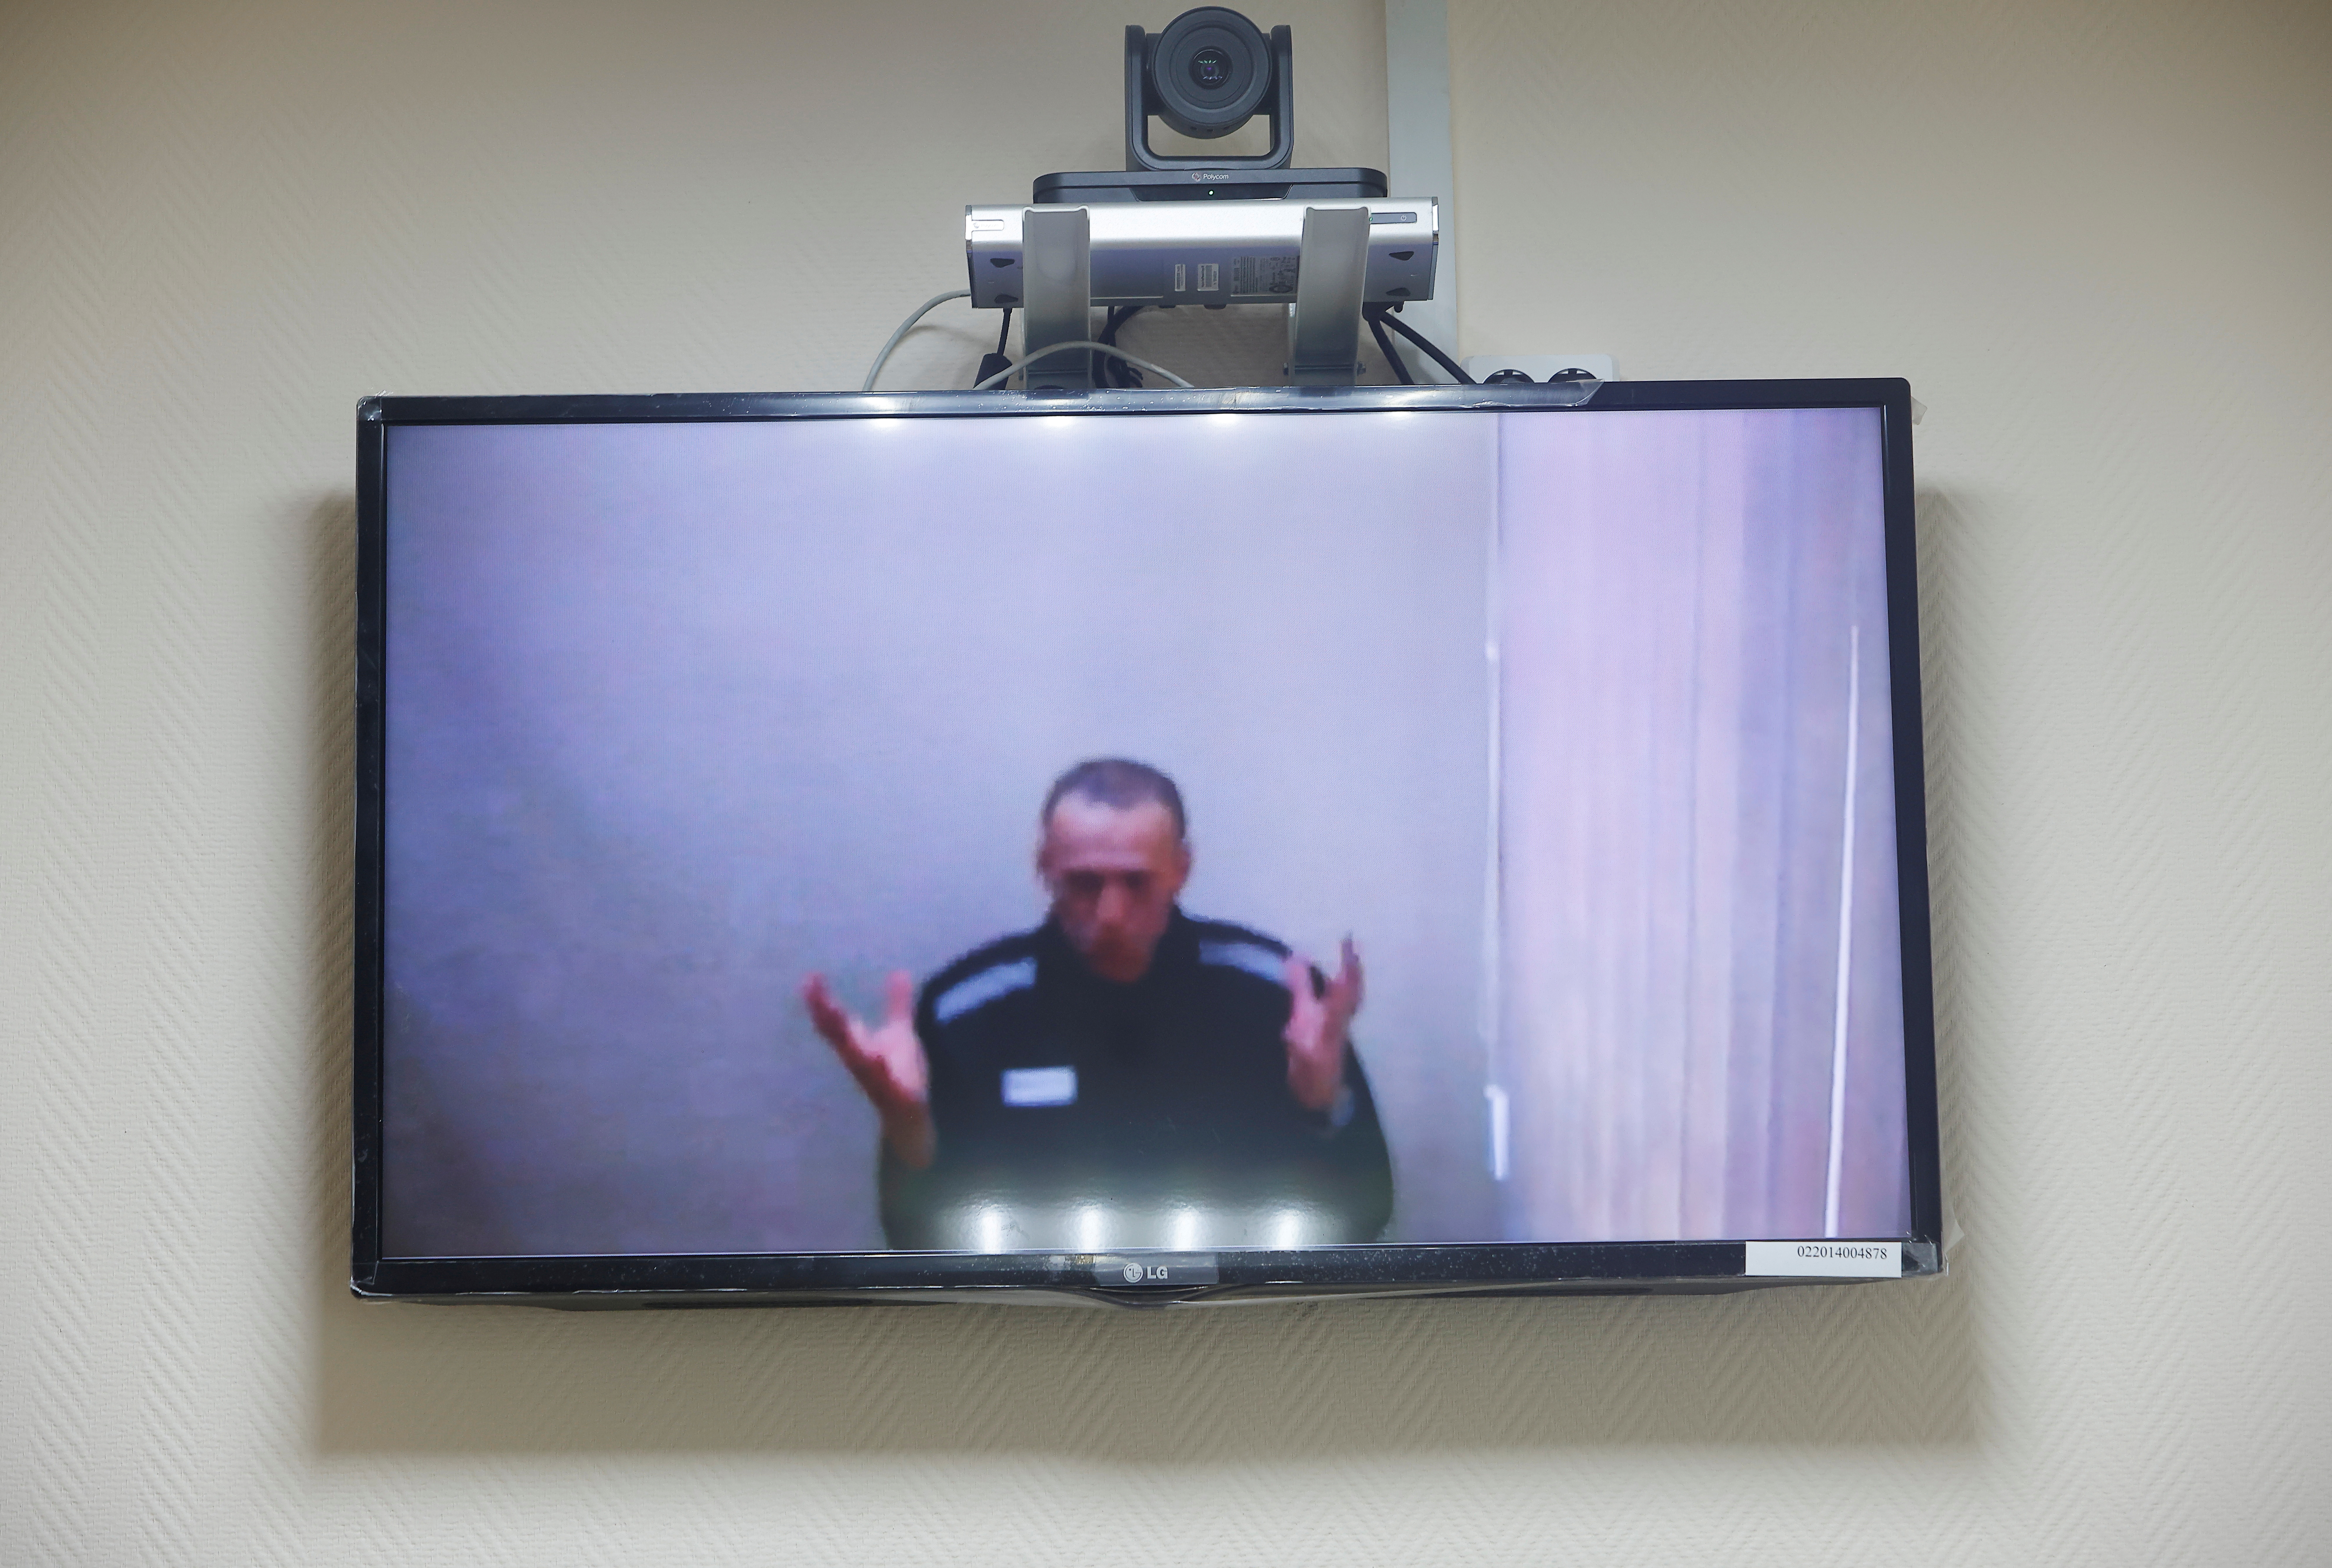 Russian opposition leader Alexei Navalny is seen on a screen via a video link during a hearing in Petushki